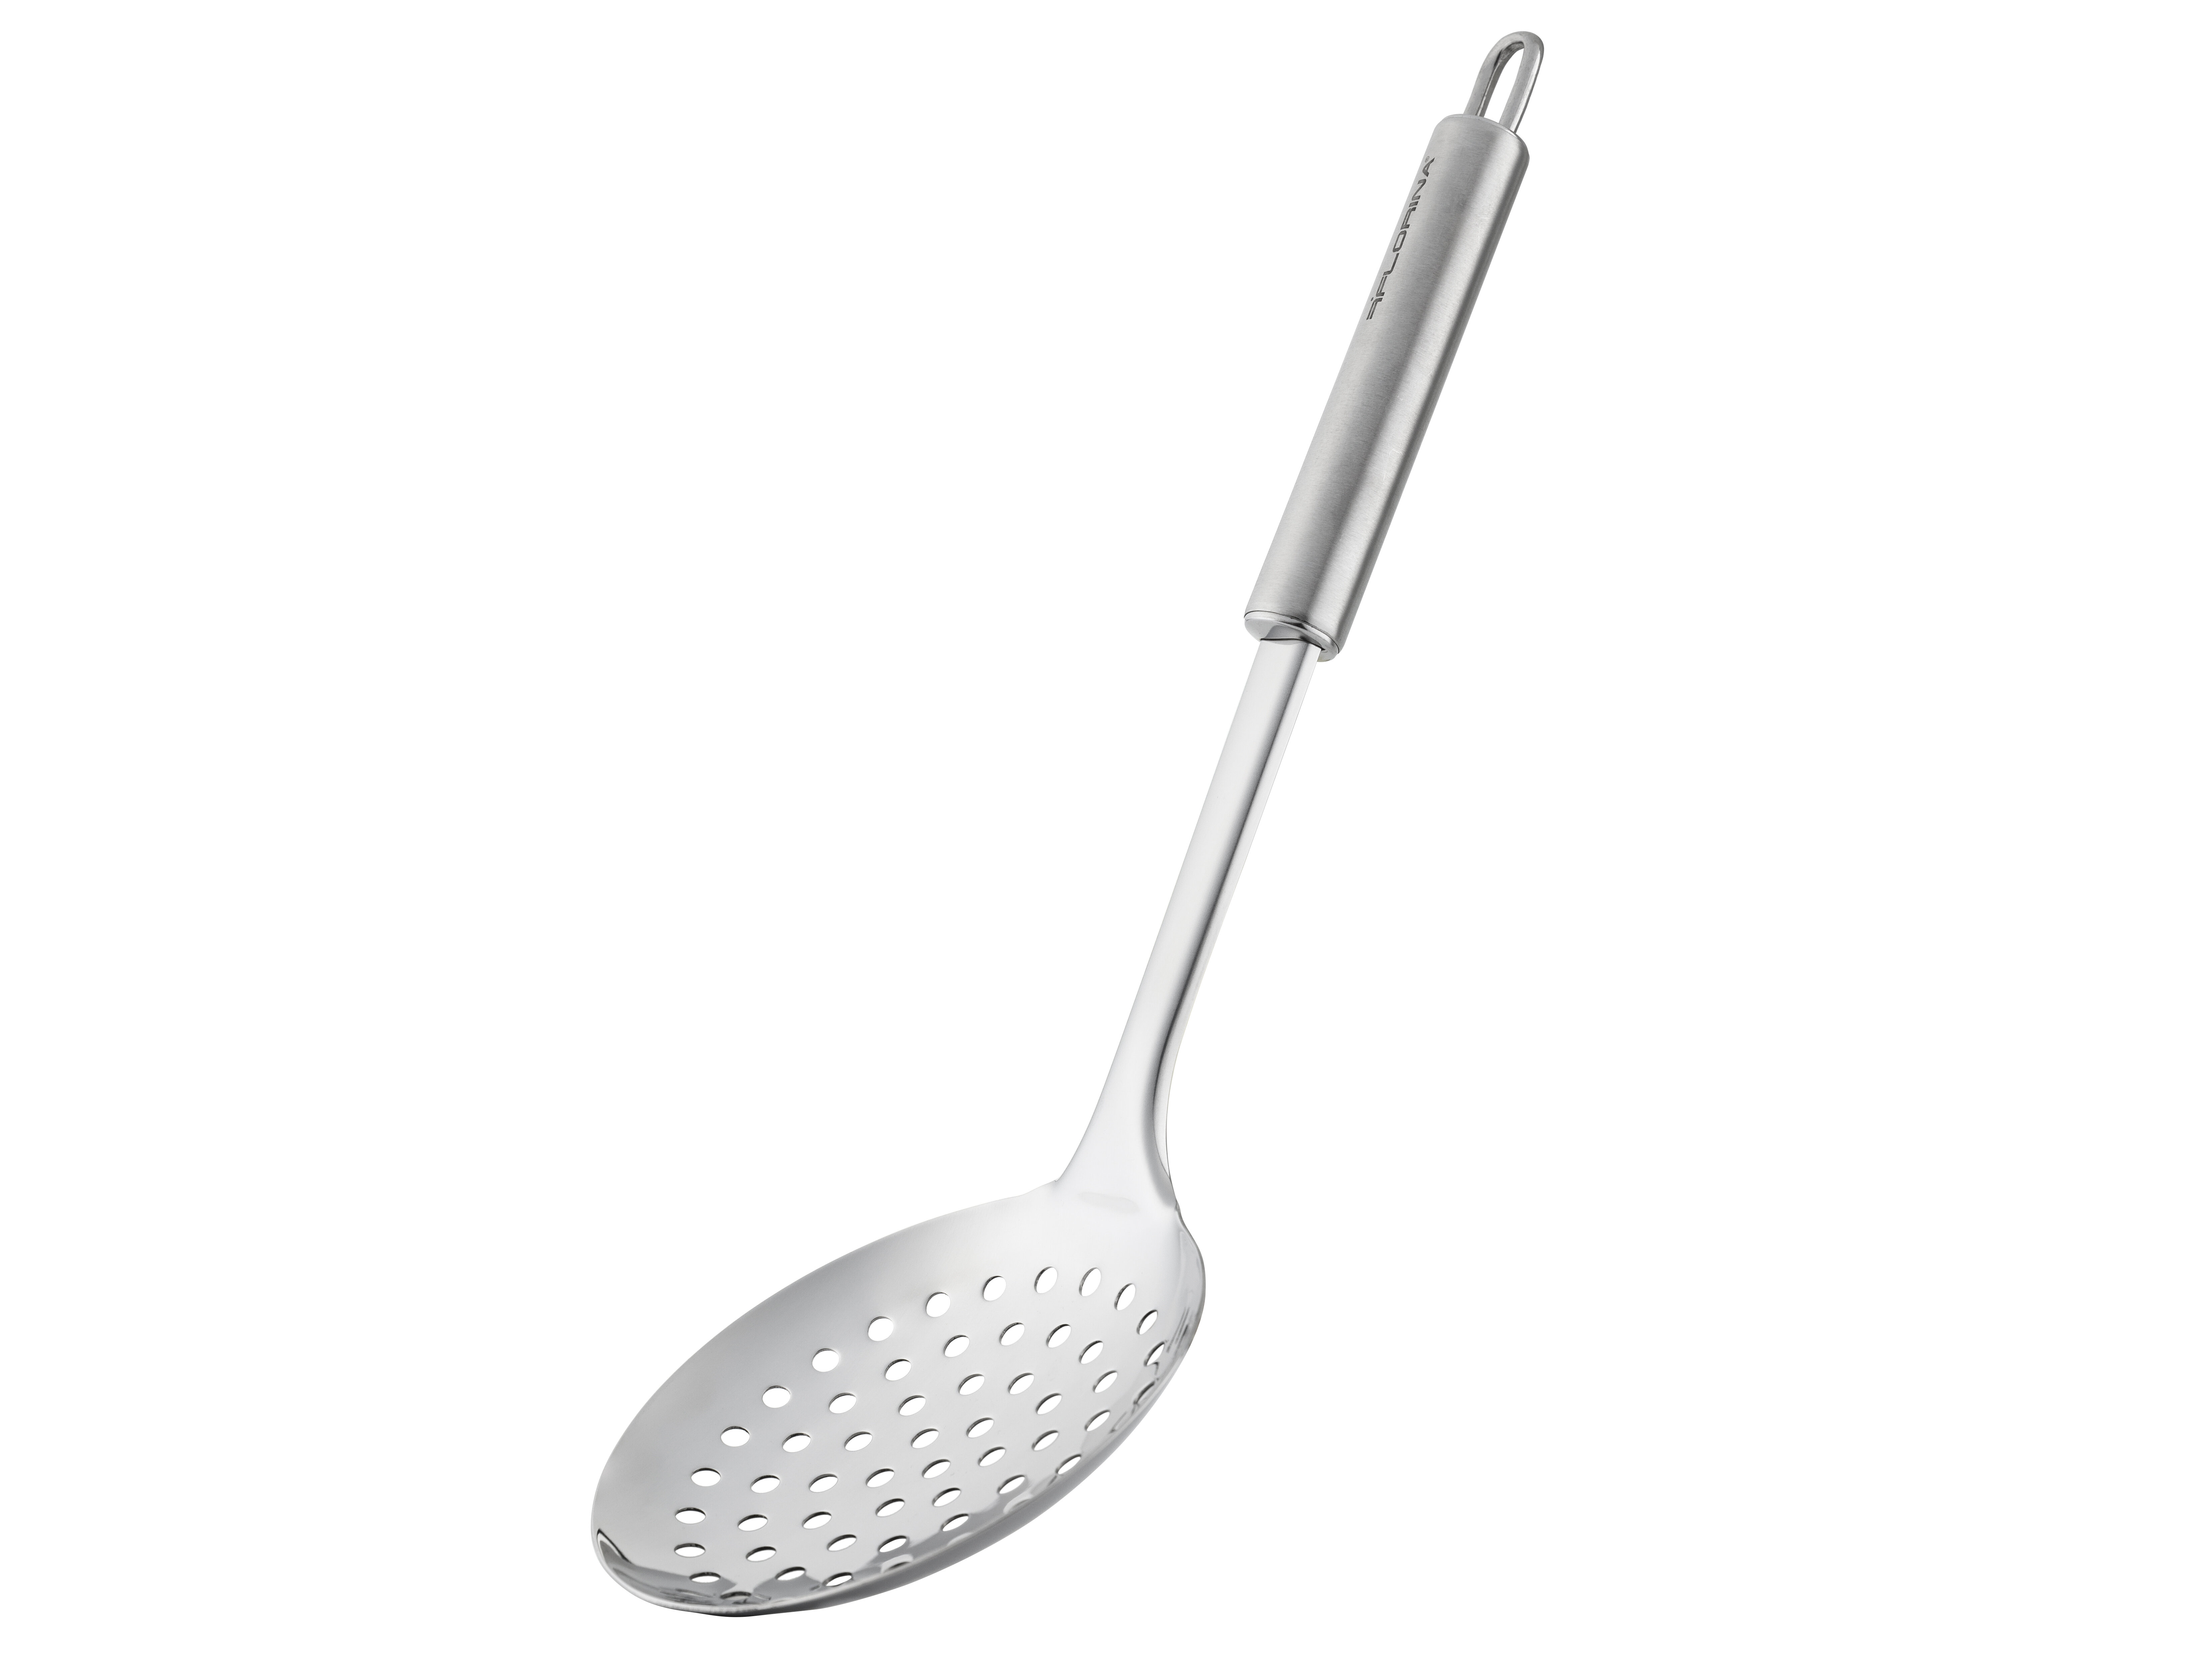 Metal Cooking Strainer with Handle Handheld Stainless Steel Slotted Spoon Skimmer Cooking Skimming Ladle Kitchen Utensil